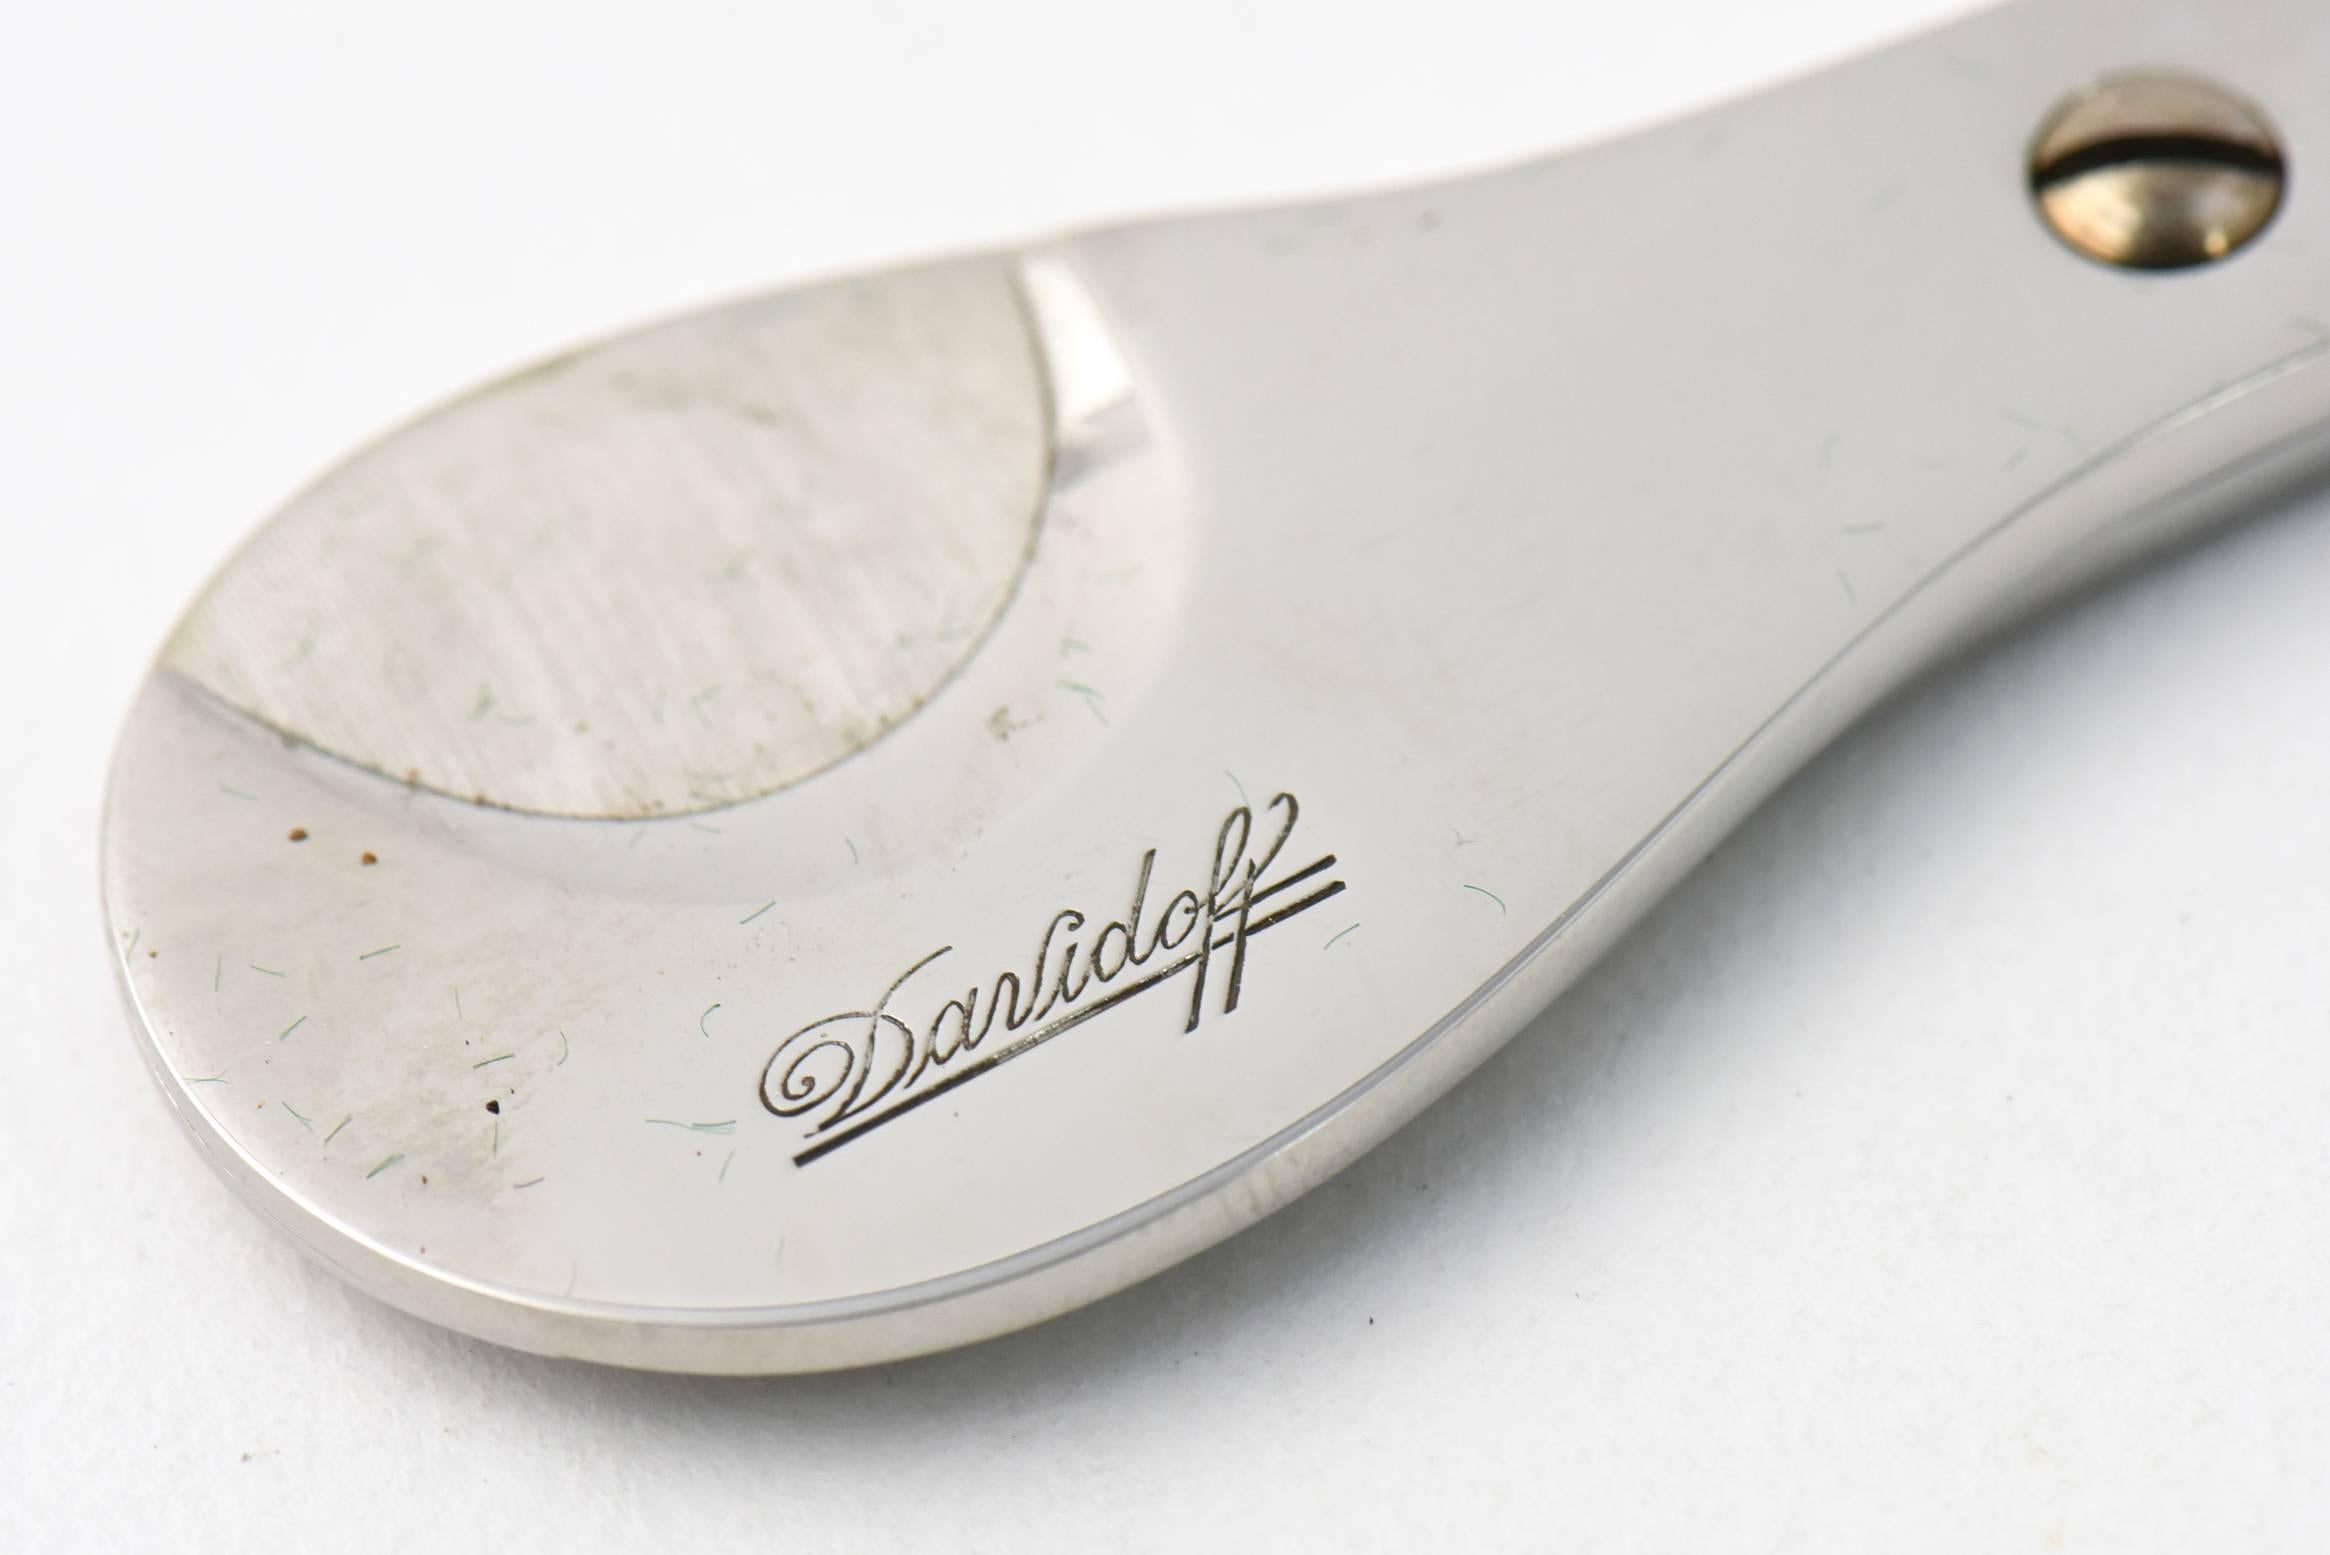 Davidoff Cigar Scissors are a first-class method of cutting the finest cigars. Hand-forged of stainless steel and assembled by hand in France, they guarantee a large, direct circular cut to allow the perfect amount of smoke through.
Retail $470.